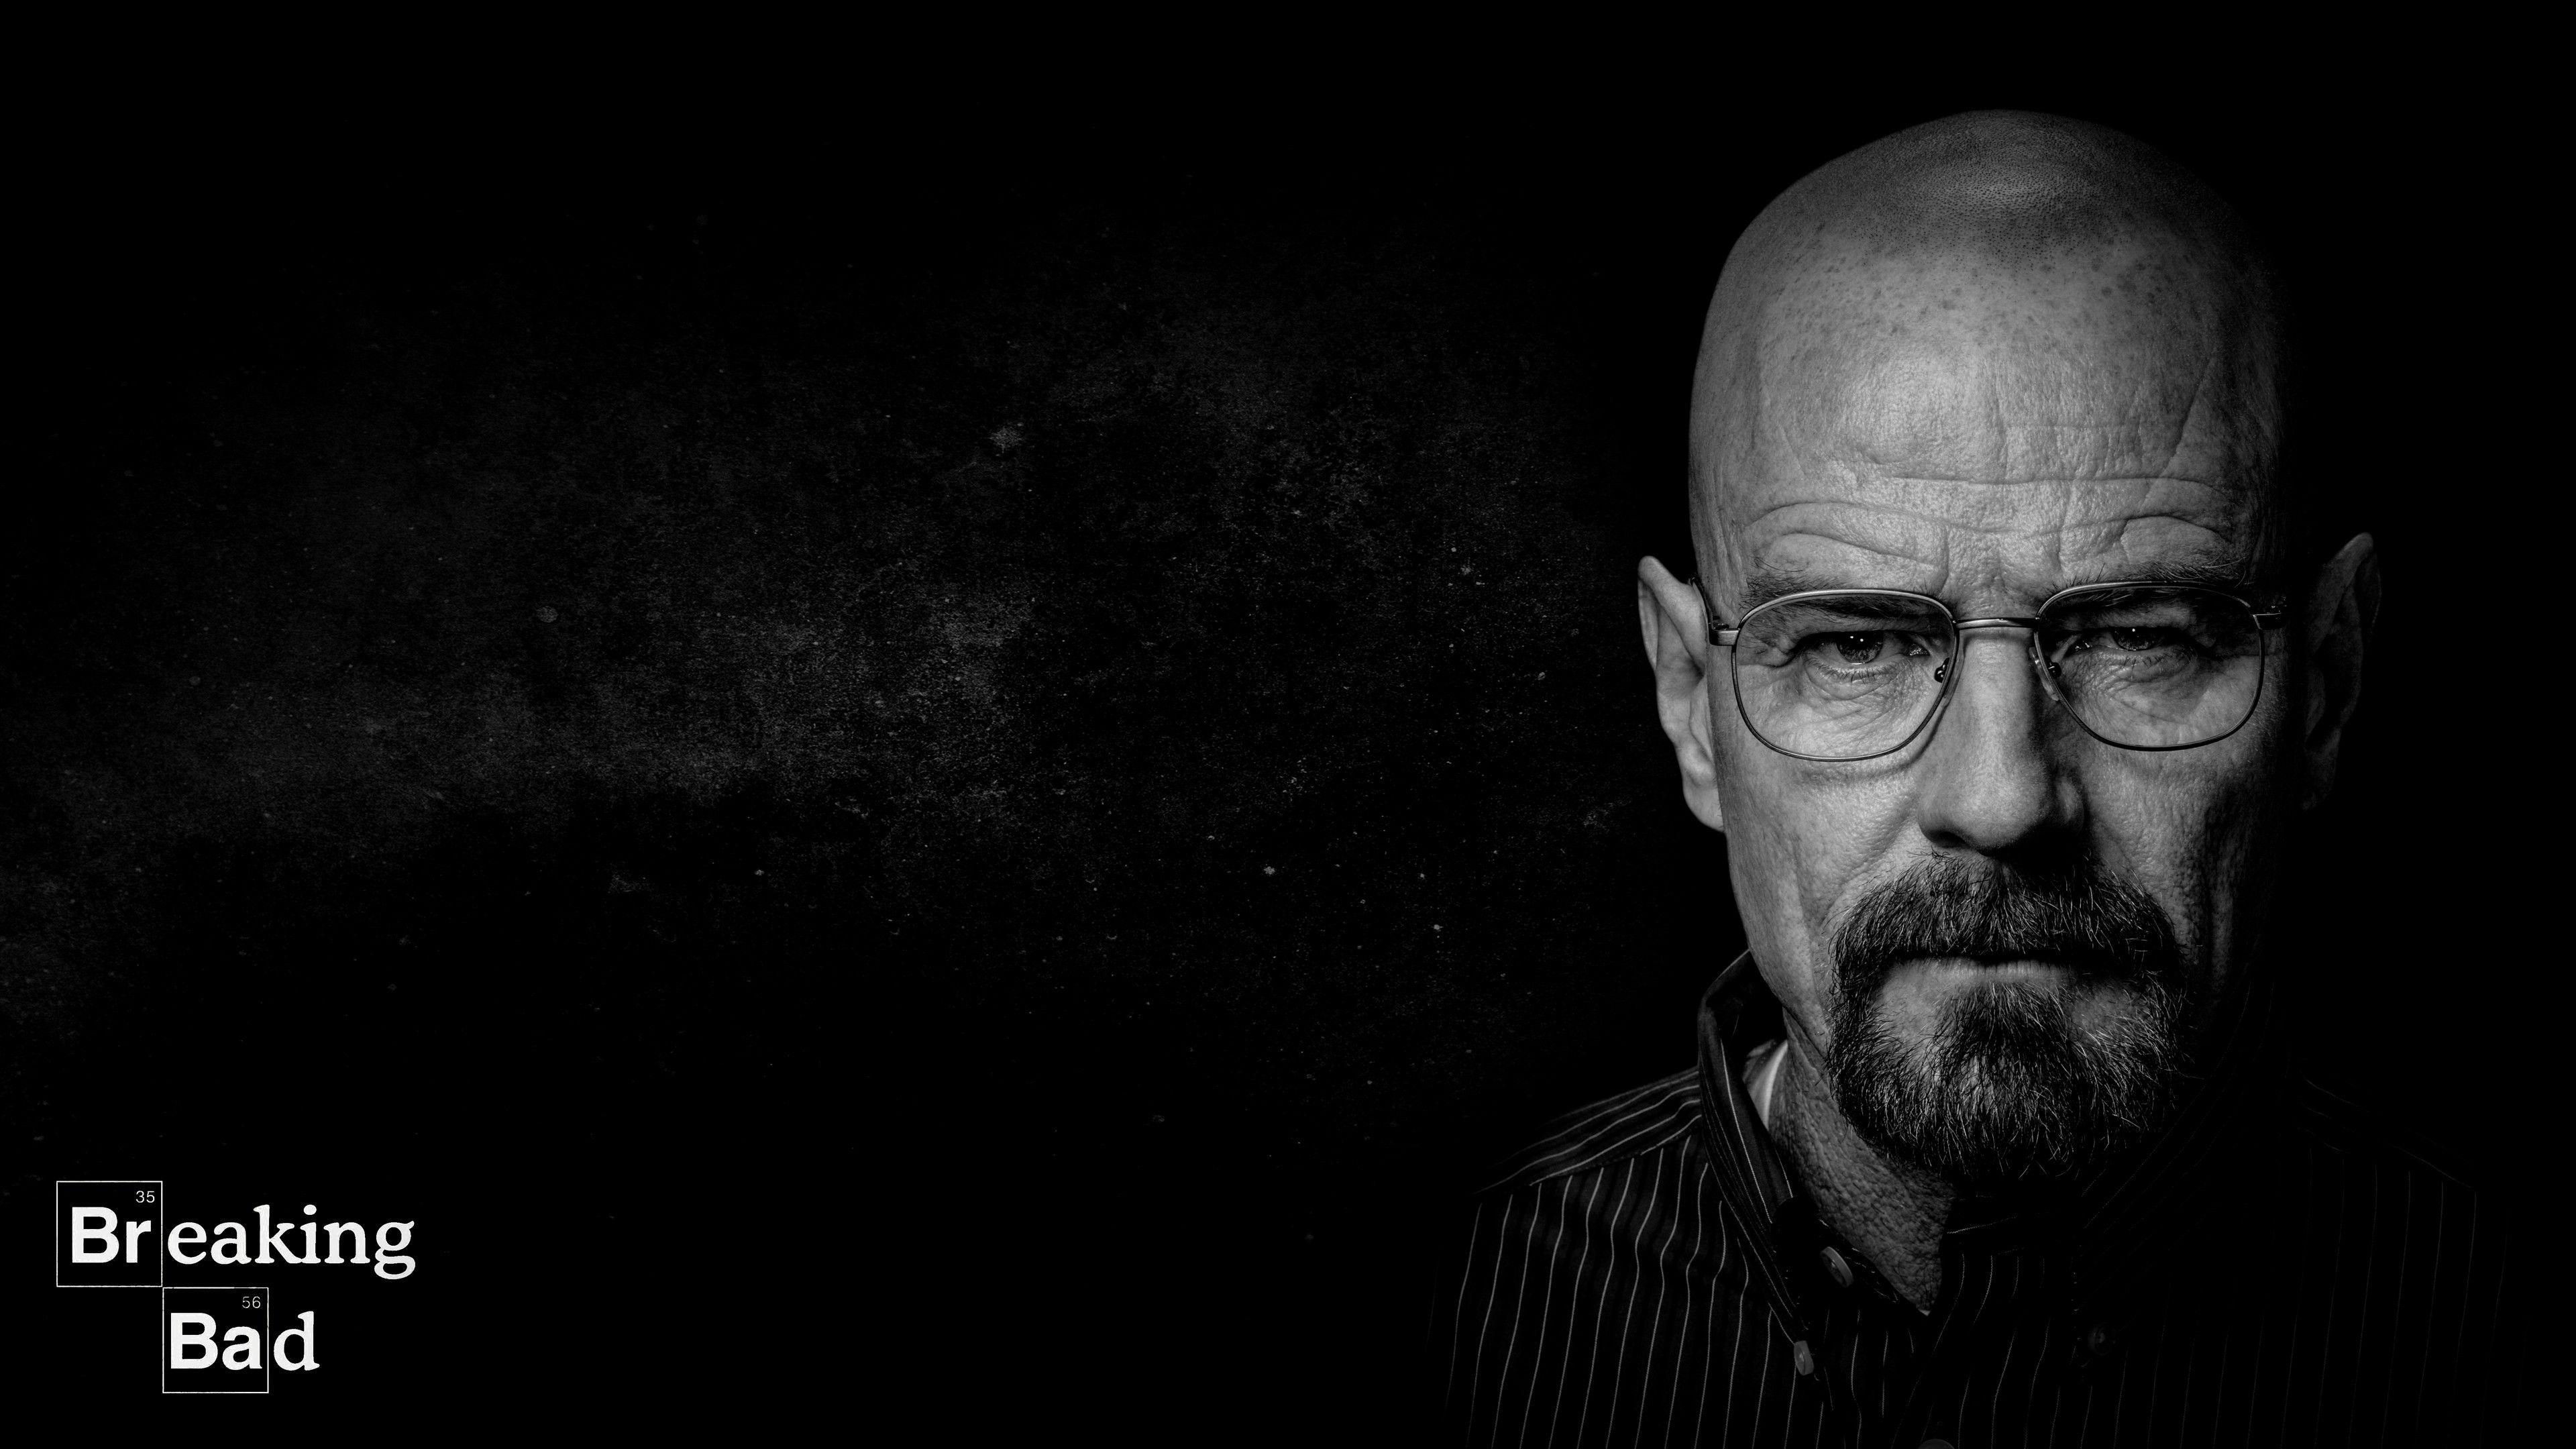 Walter White From Breaking Bad, HD Tv Shows, 4k Wallpaper, Image